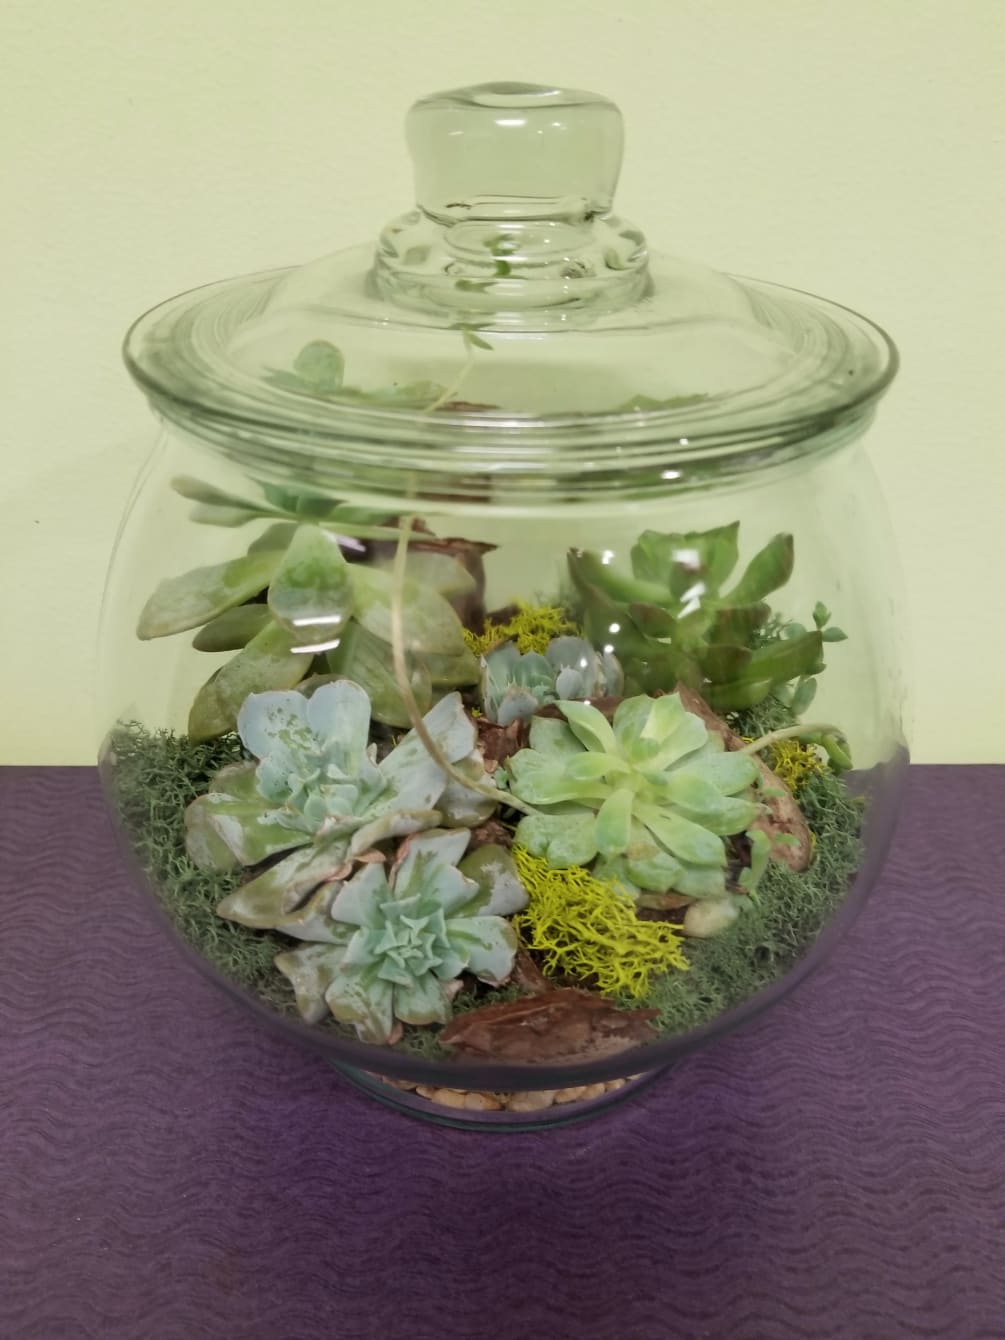 This unique terrarium is a one of a kind design with about